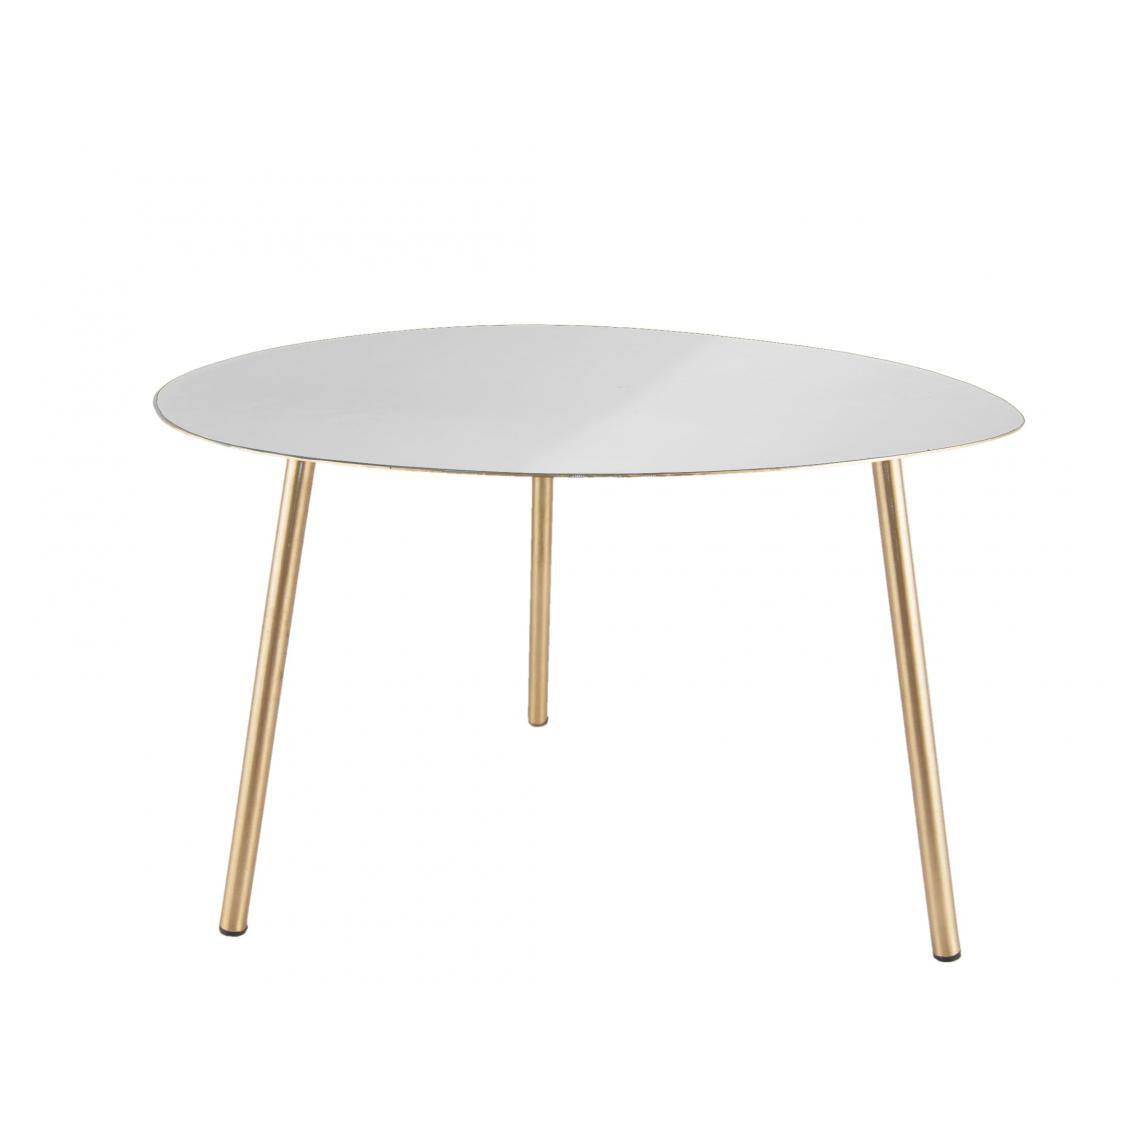 3S. x Home - Table Basse OVOID Small Blanc - Tables basses